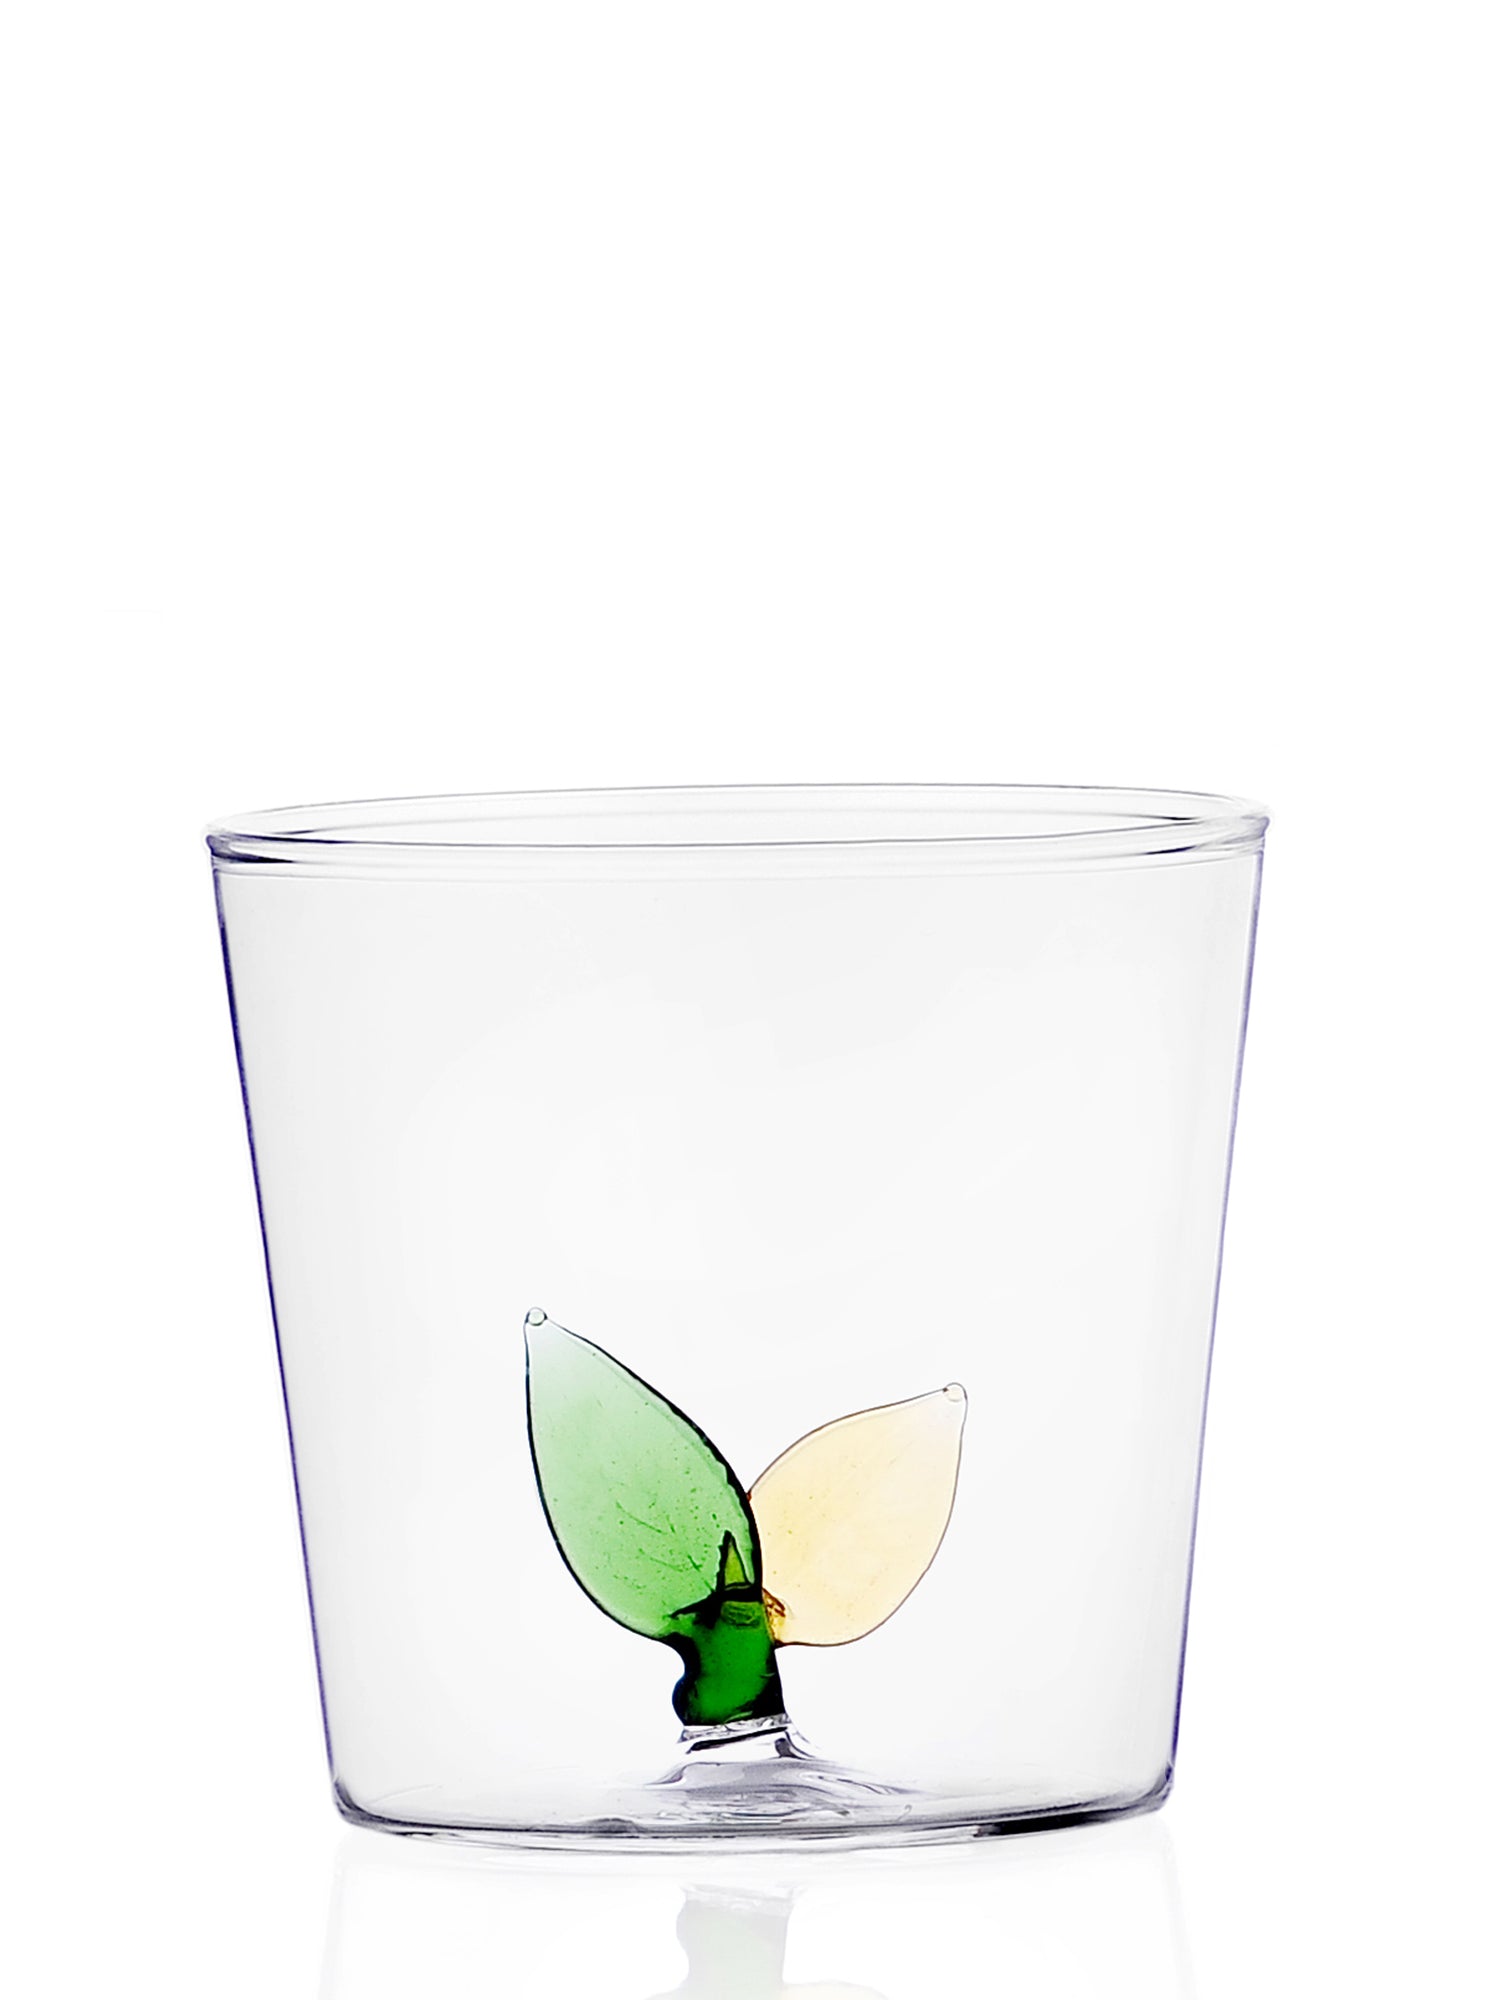 Leafs Tumbler, Greenwood Collection